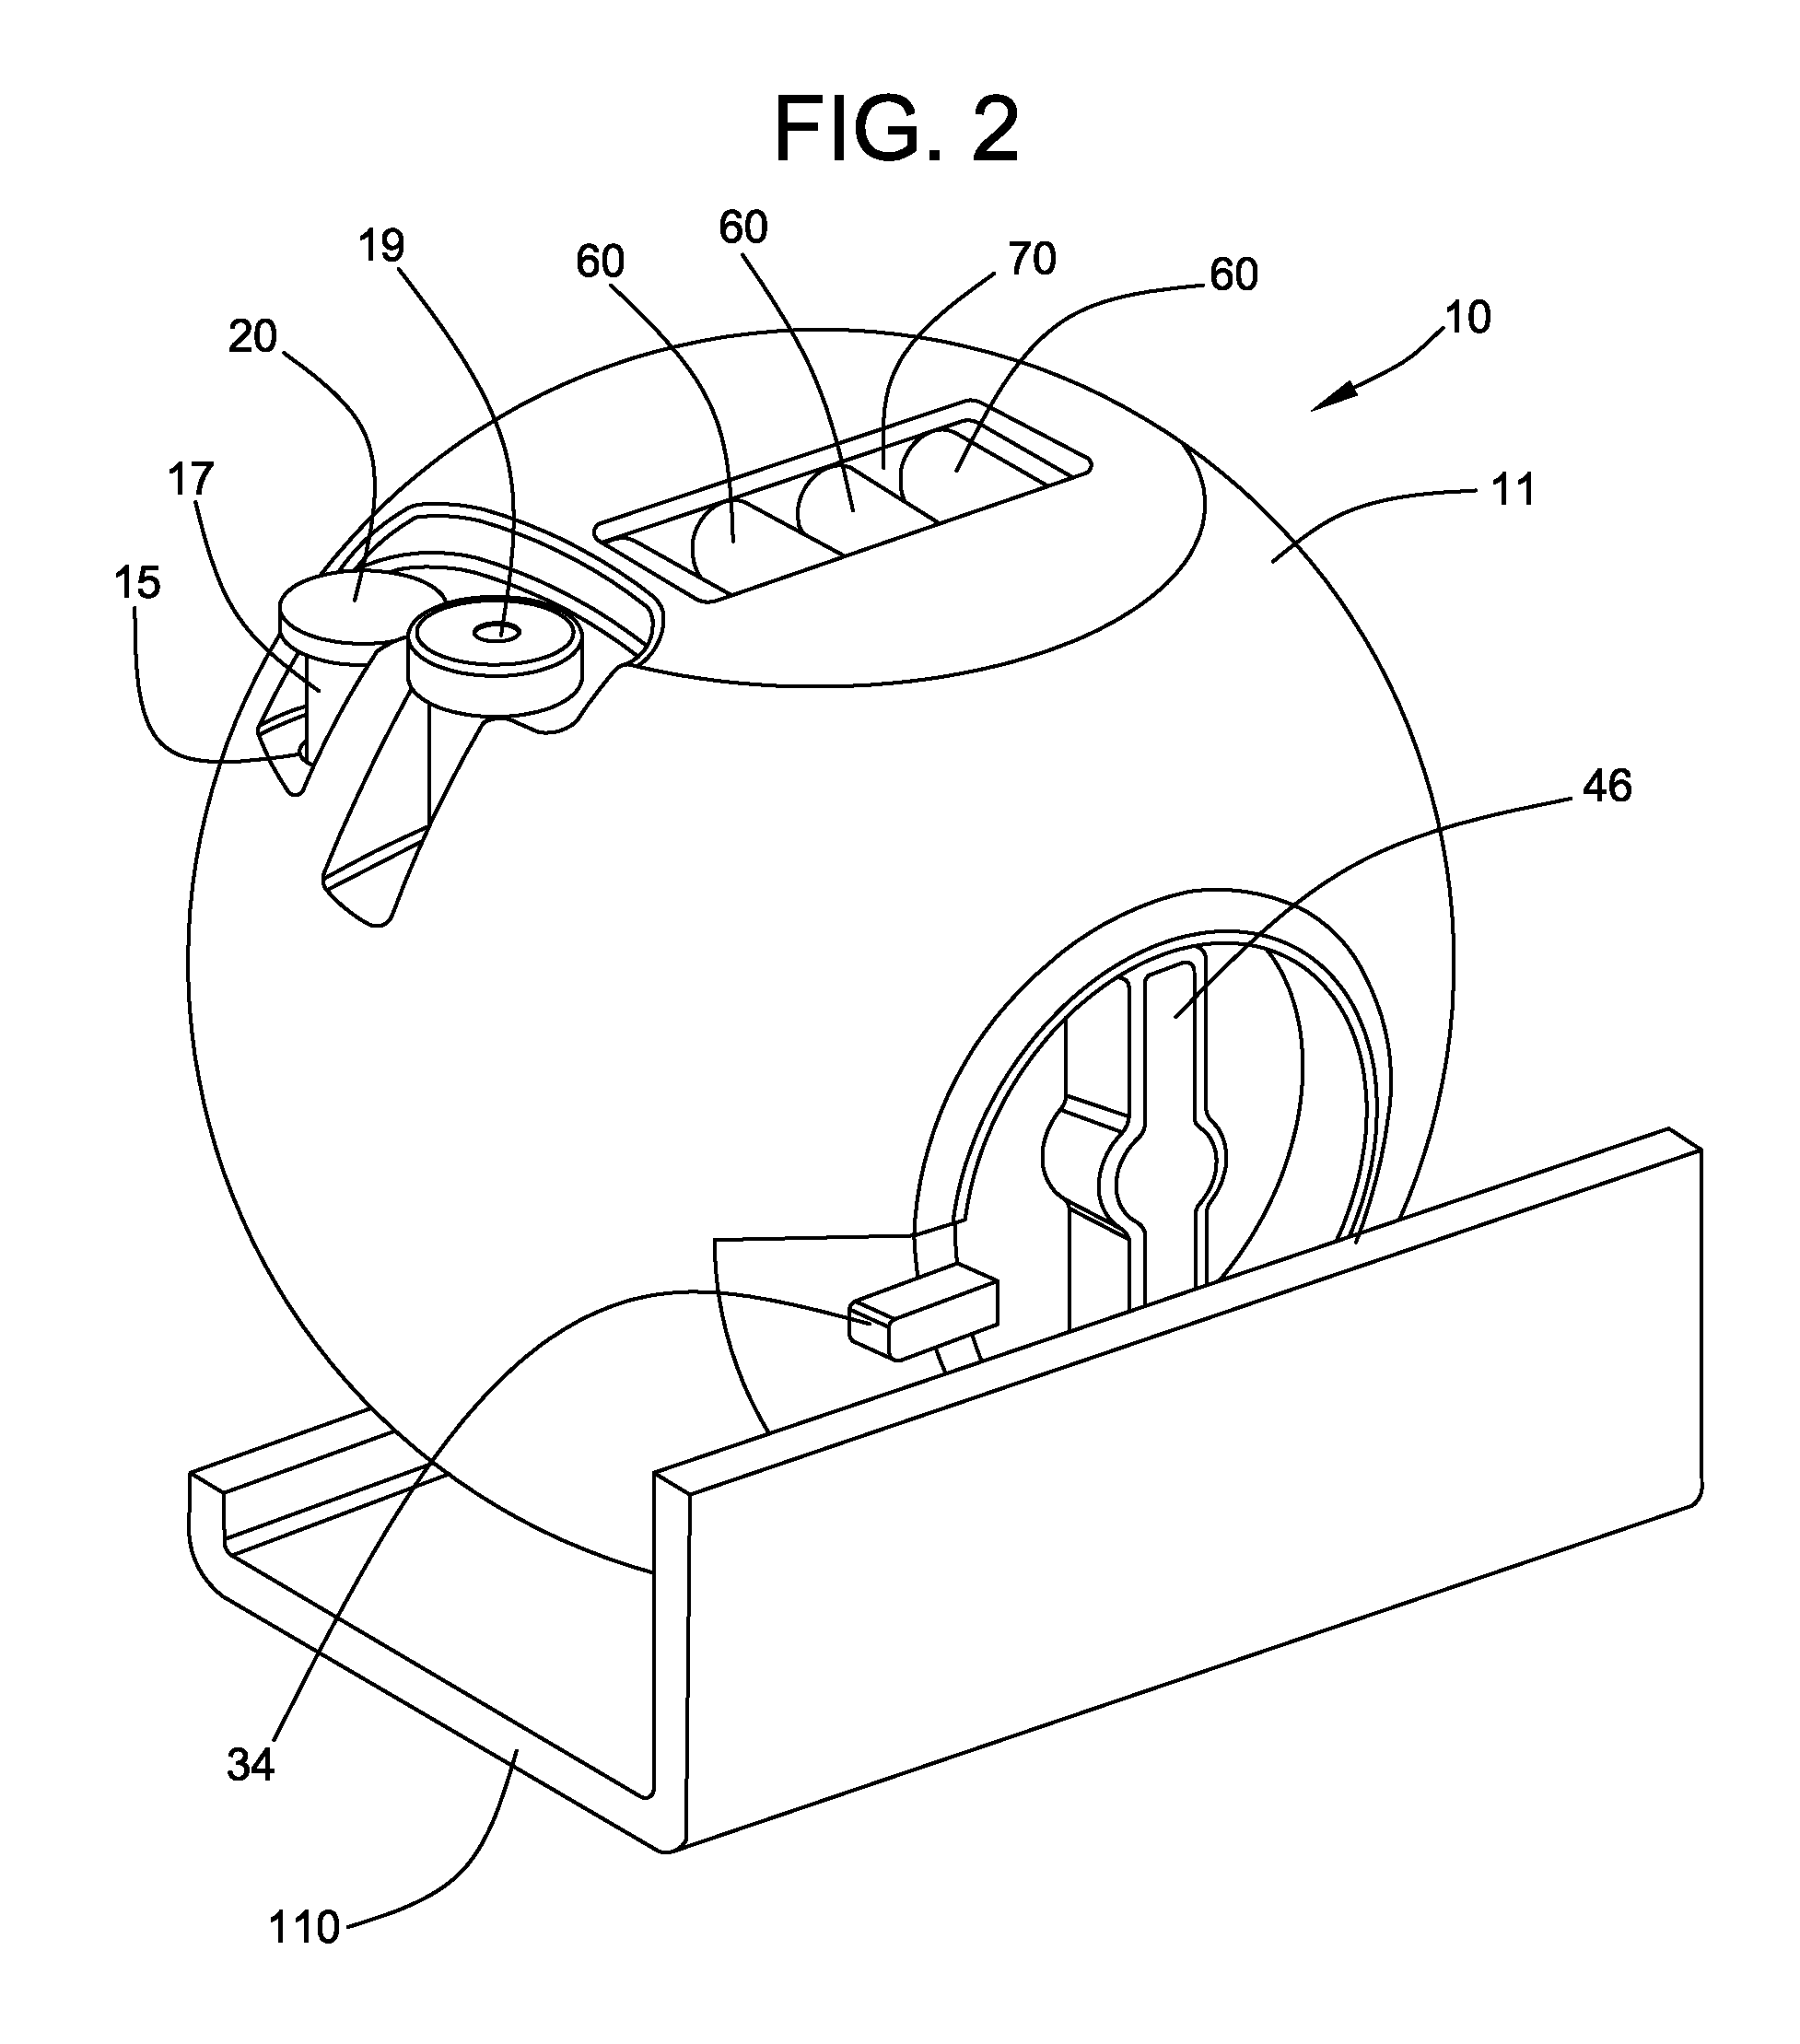 Device and method for automating microbiology processes